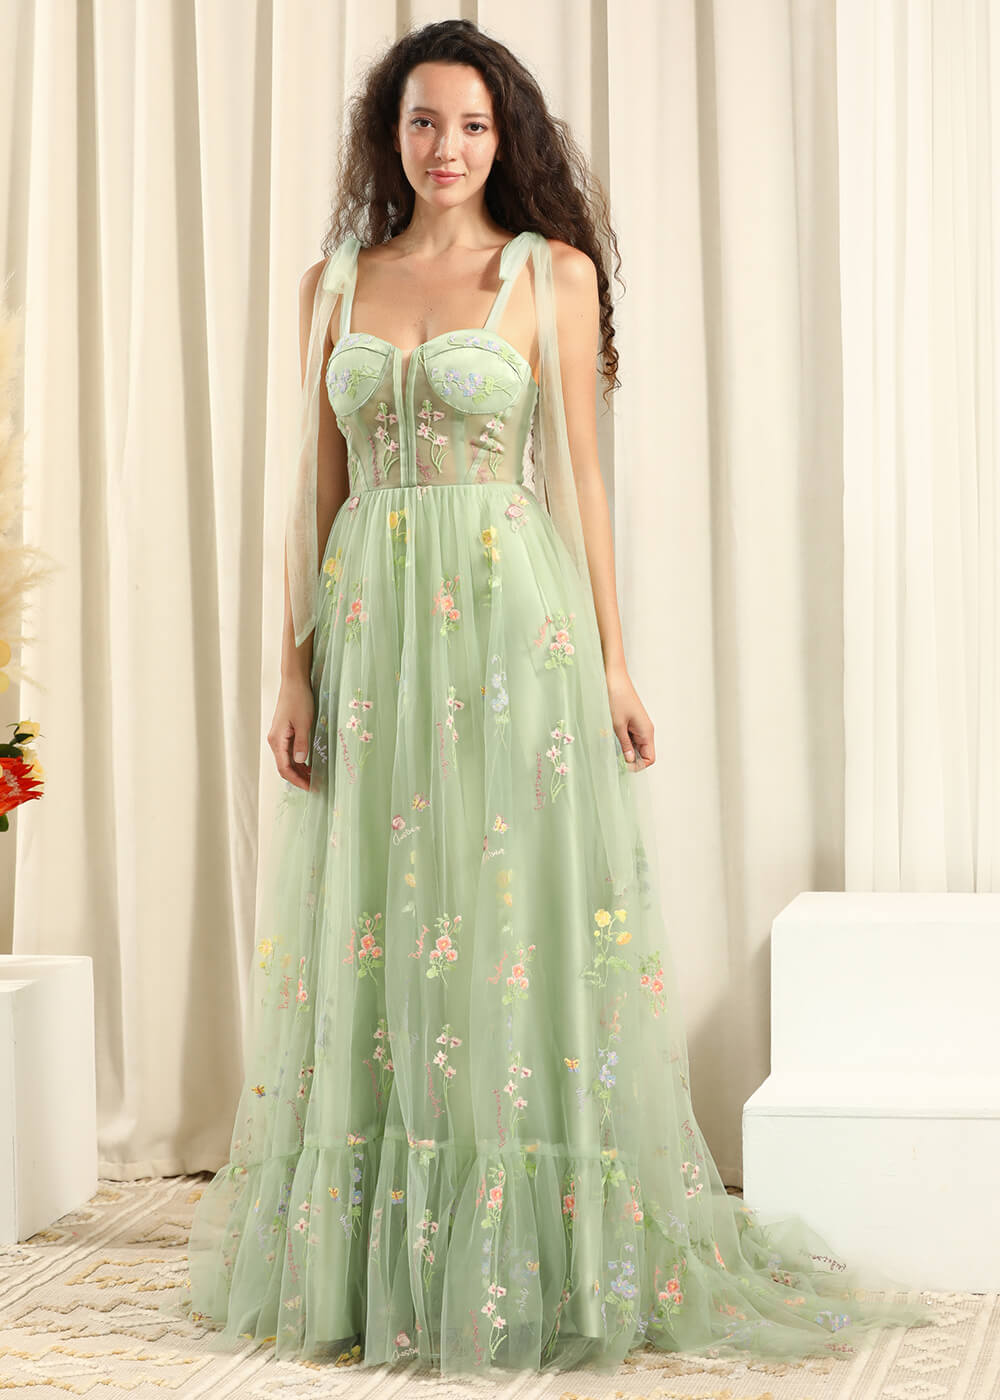 Green Tulle Flower Embroidery Adjustable Strap A-line Long Bridesmaid